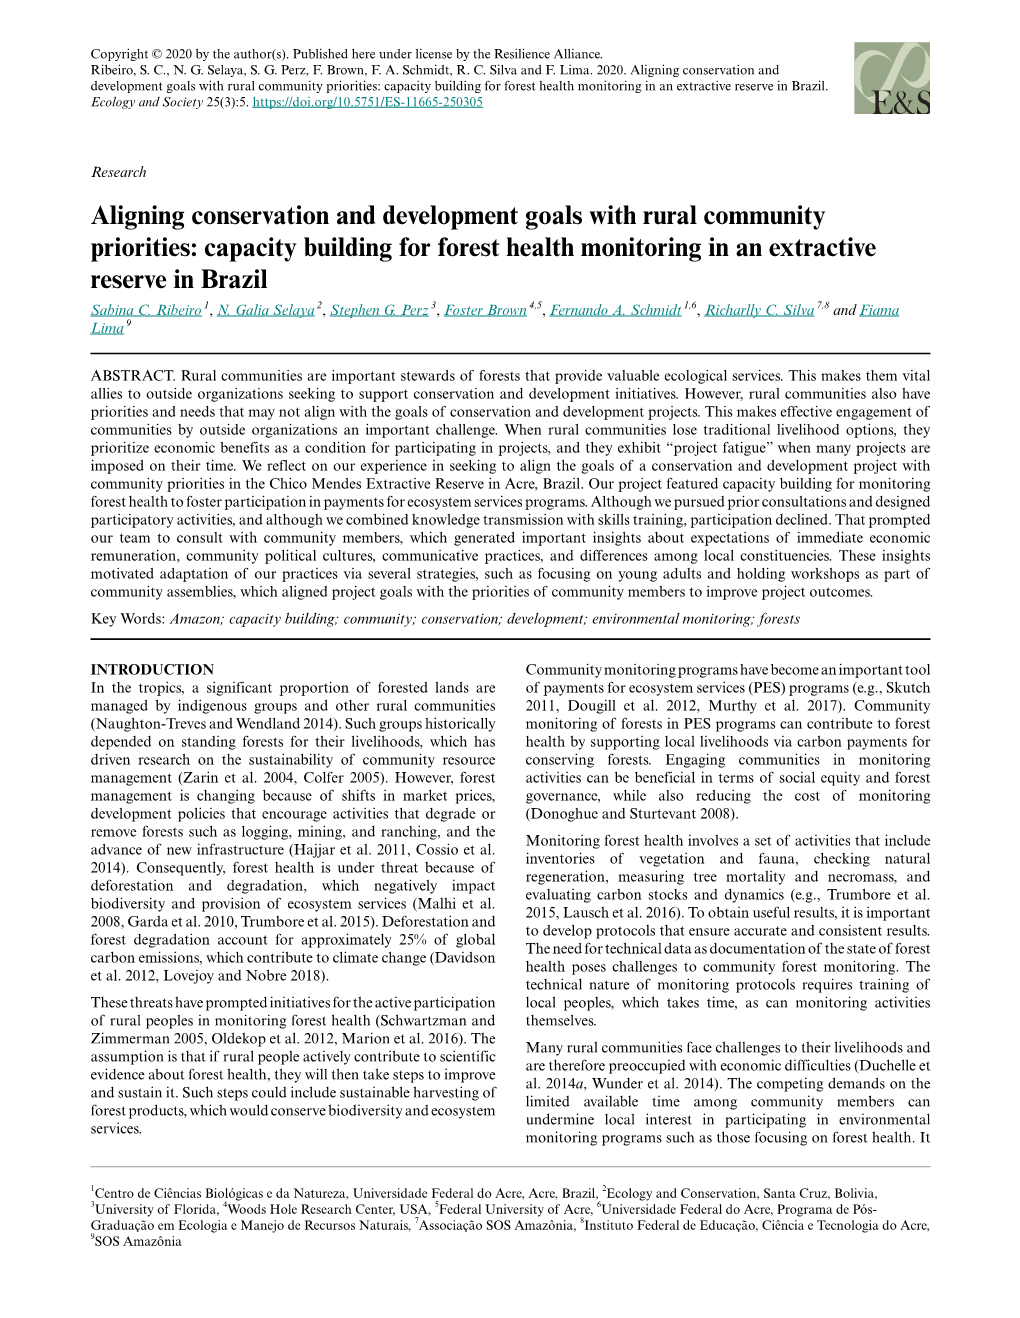 Capacity Building for Forest Health Monitoring in an Extractive Reserve in Brazil